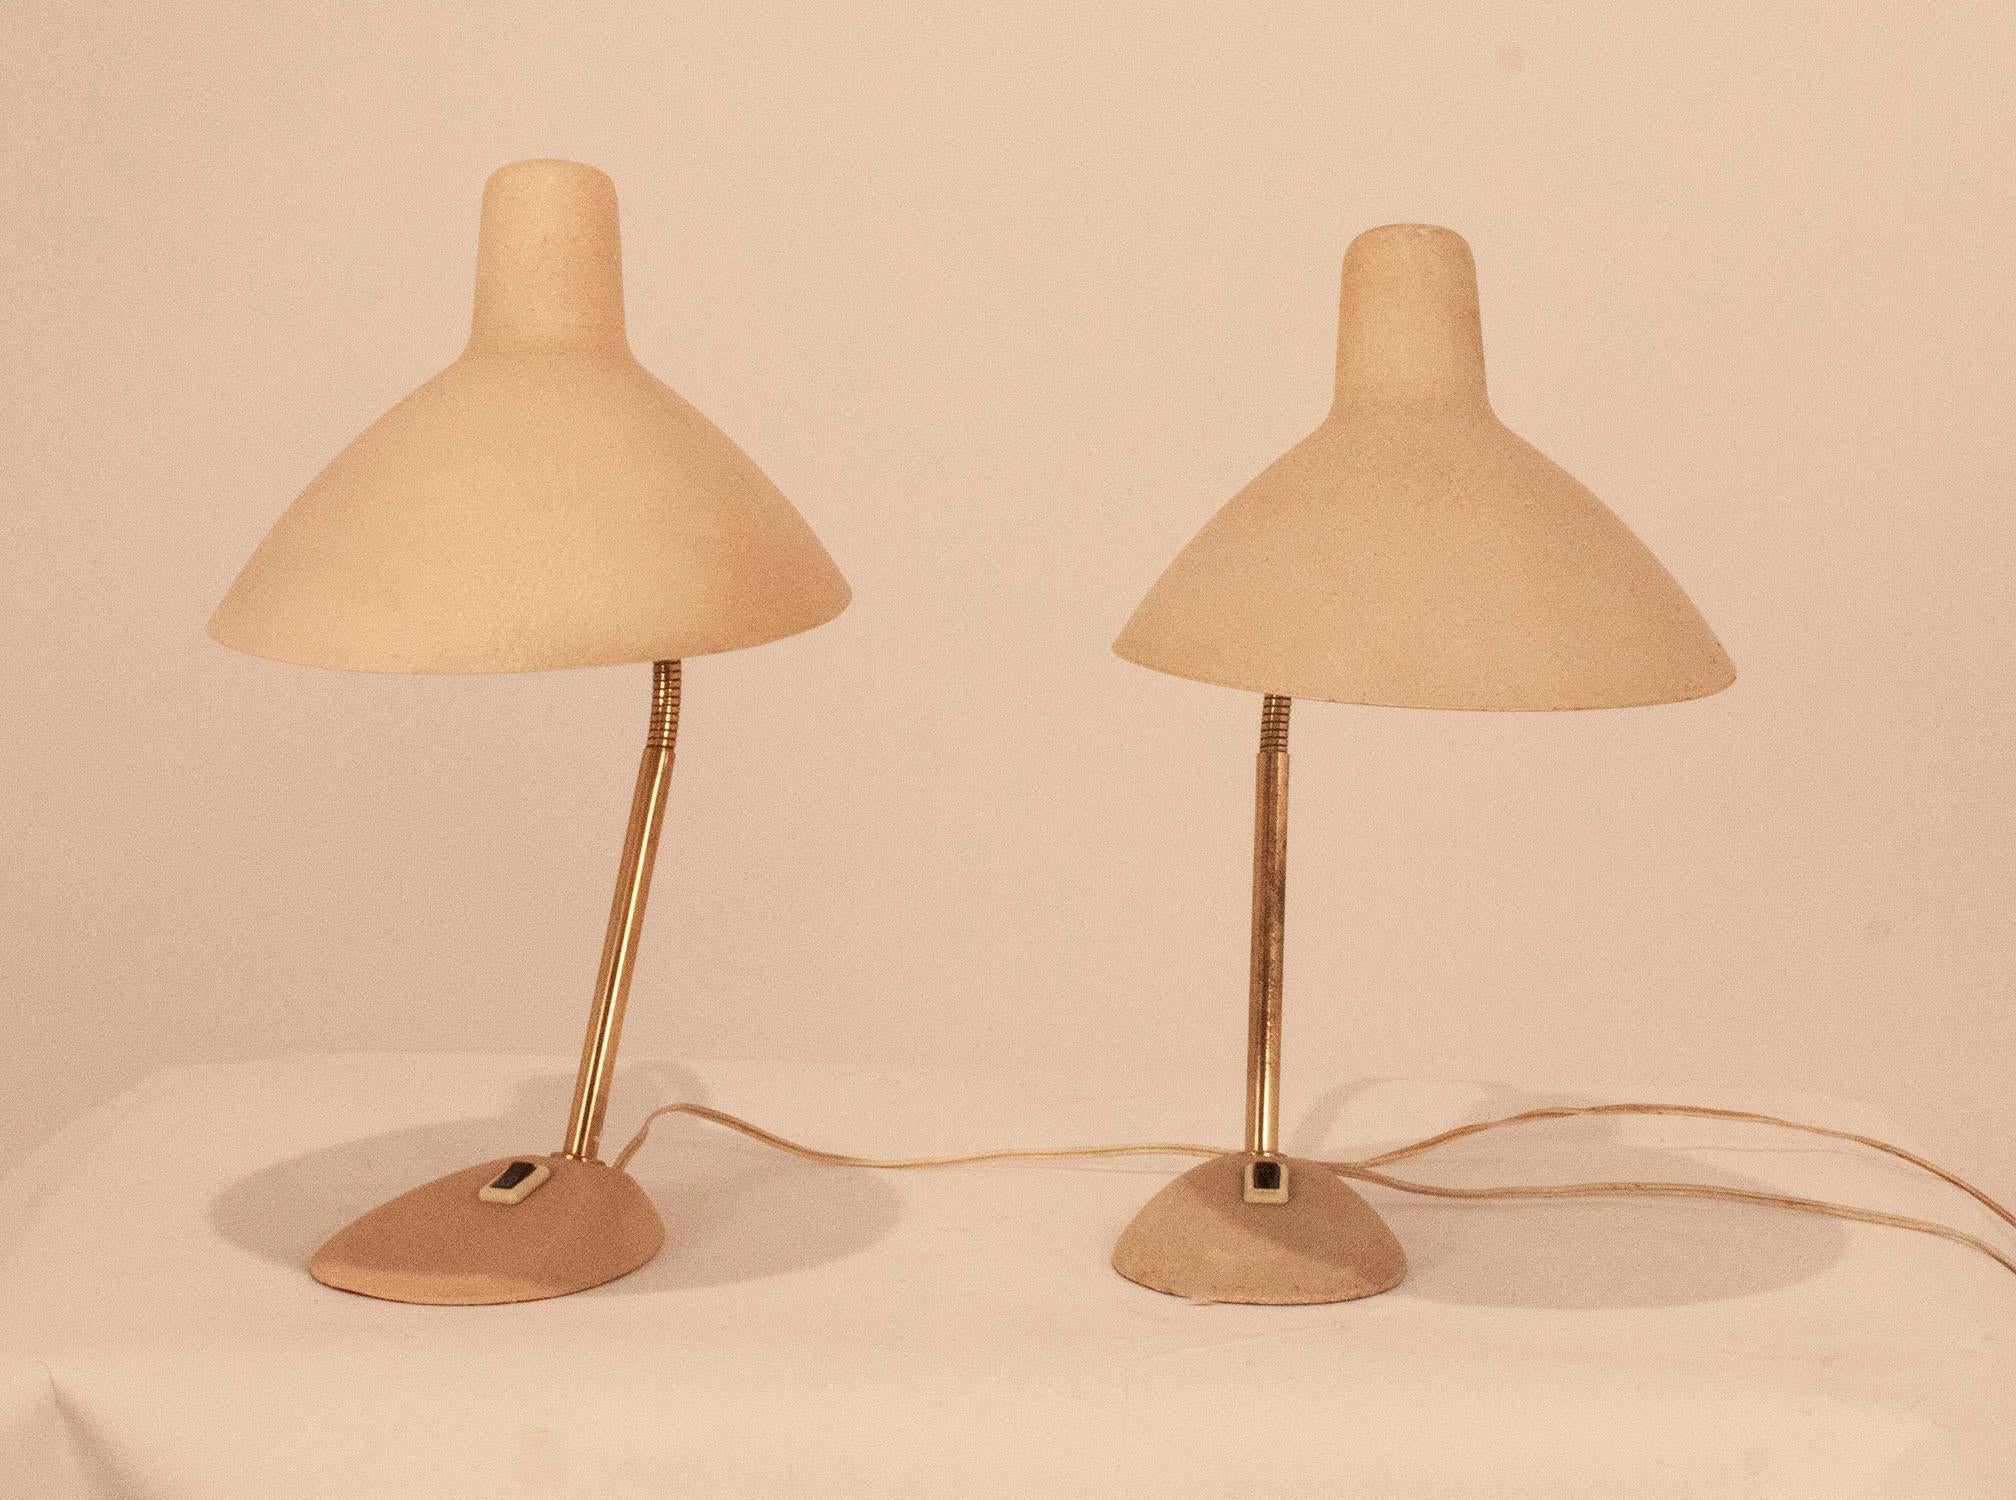 Large Pair of Table Lamps, Boris Lacroix, 1950s, France, Metal and Brass 3